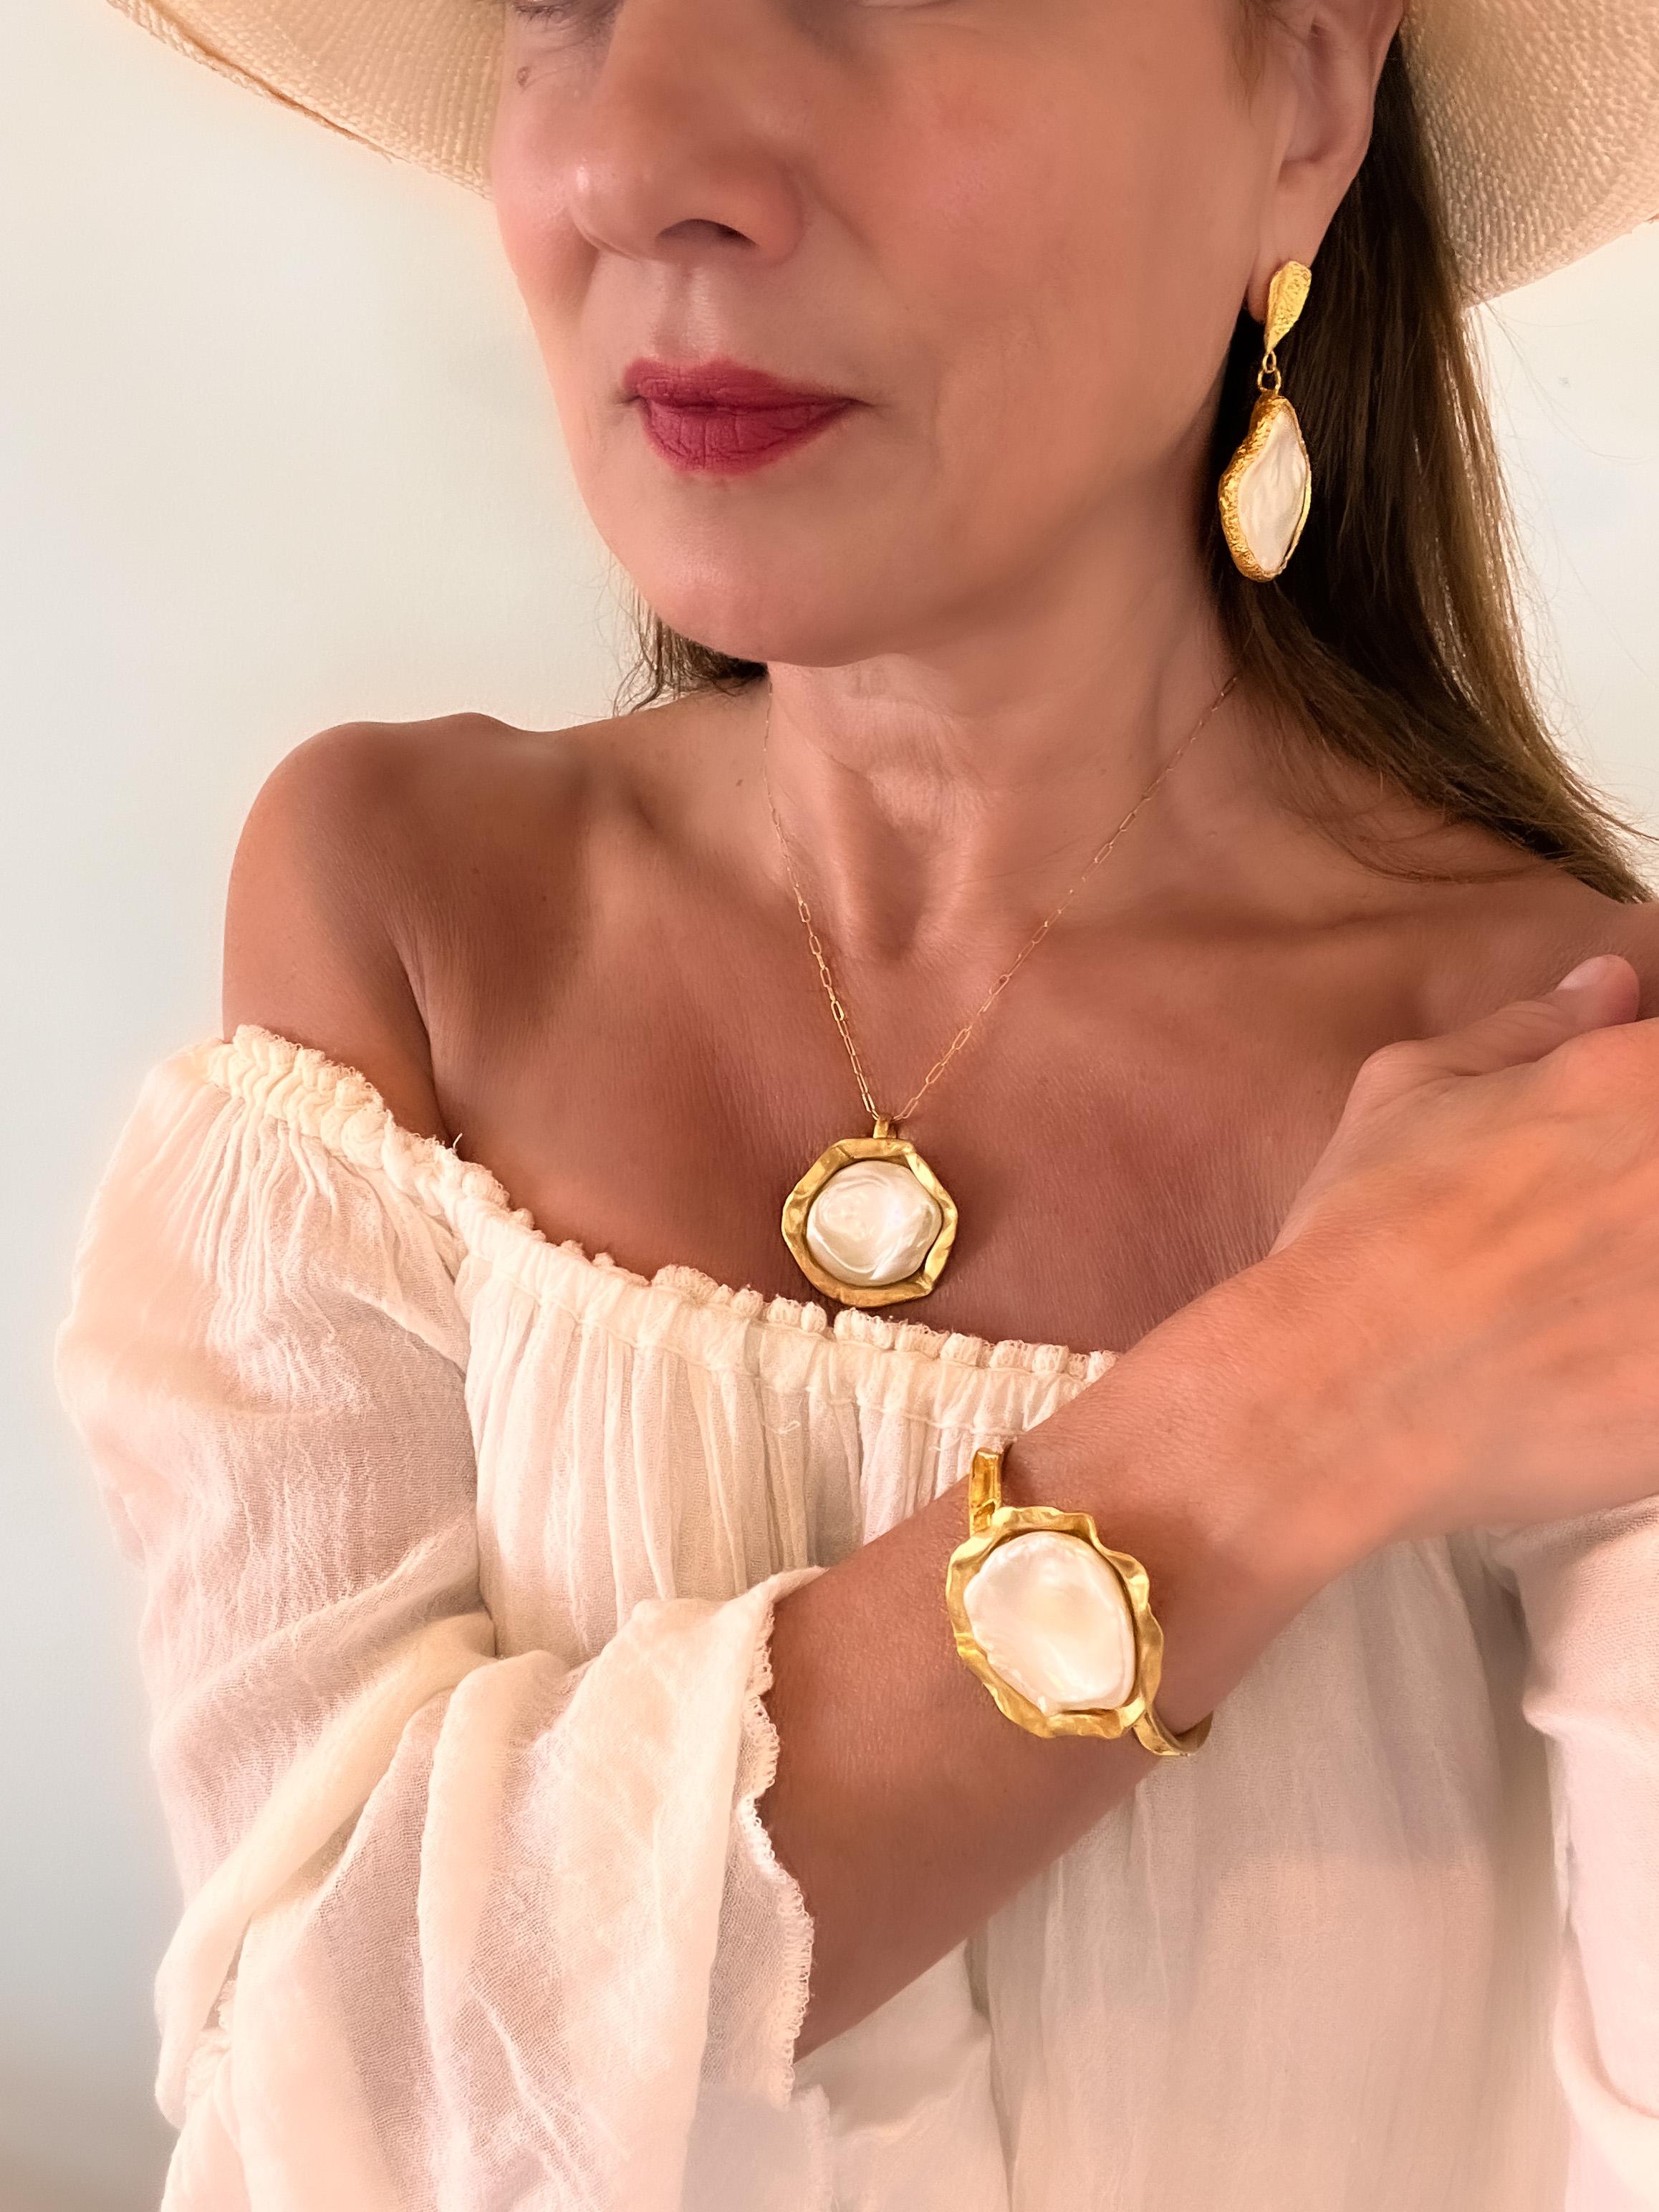 22k gold baroque coin pearl cuff is a hand made, hand carved one of a kind stunner! The cuff itself is intricately carved and the bed of gold the pearl sits in is inspired by the Ocean, the Coral Reef. The Pearl Collection represents the beauty,